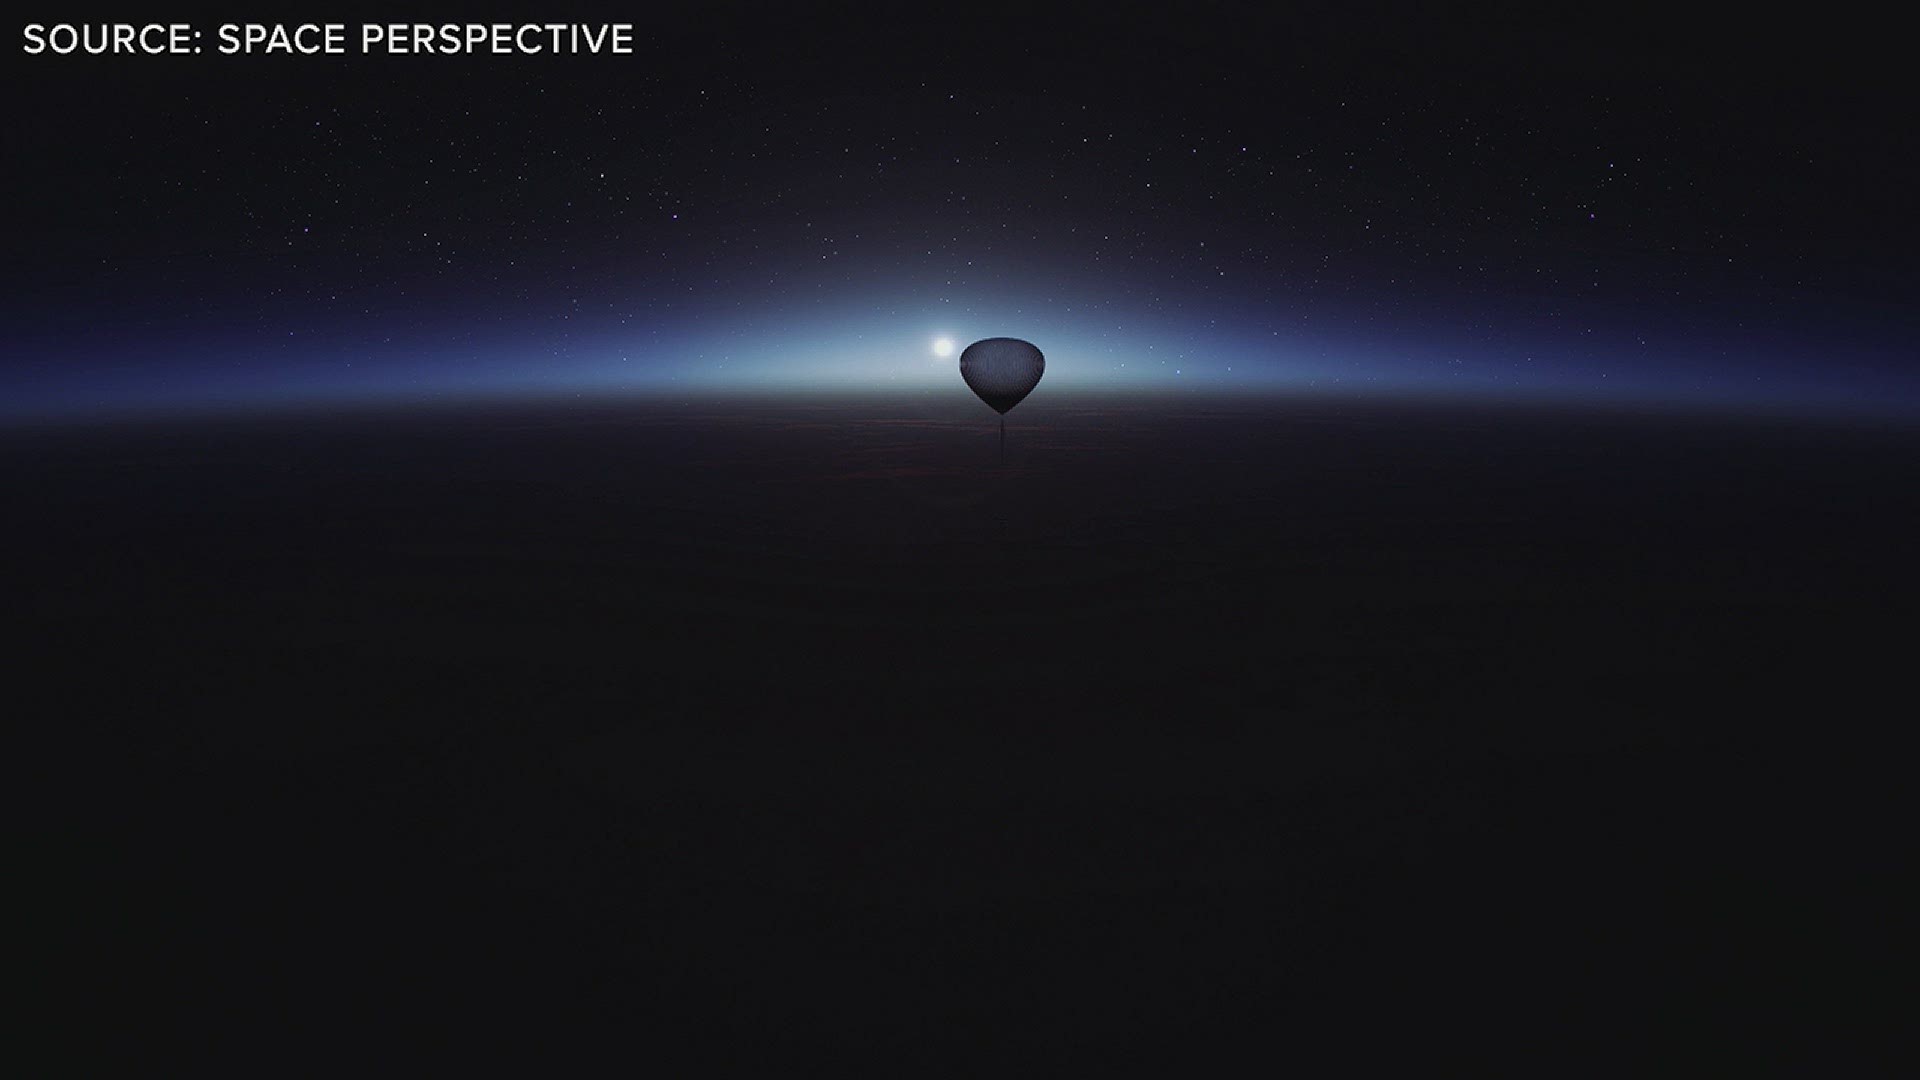 An animation of Space Perspective's Spaceship Neptune balloon.